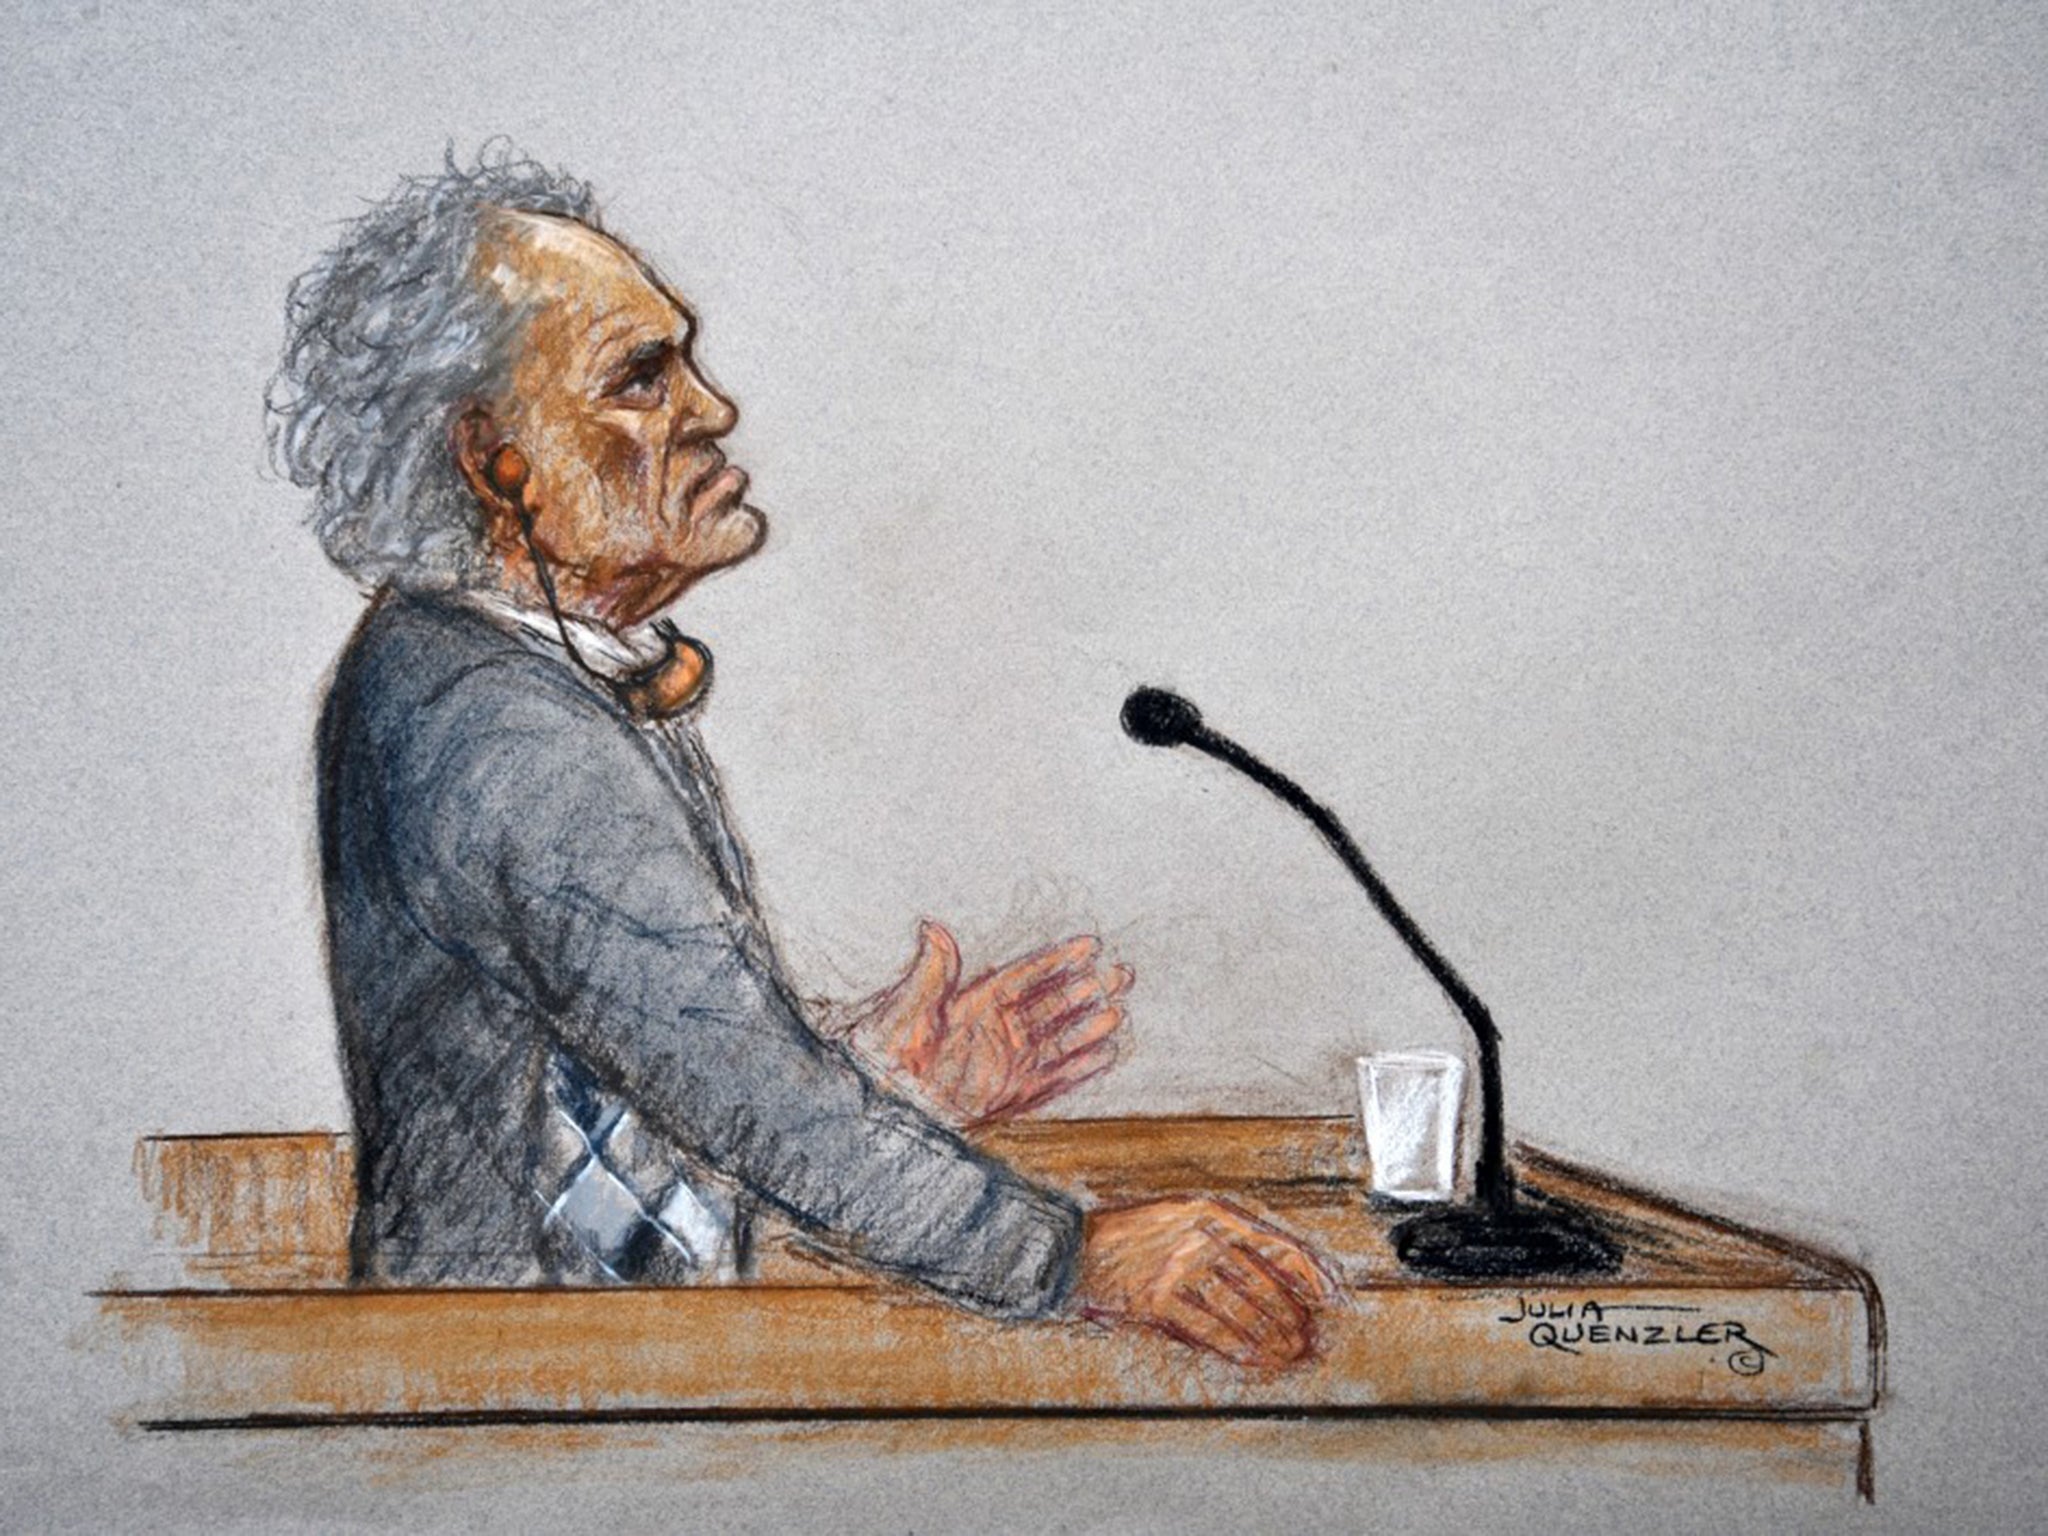 Aravindan Balakrishnan told the court his mind-controlling accomplice was responsible for events such as the space shuttle disaster